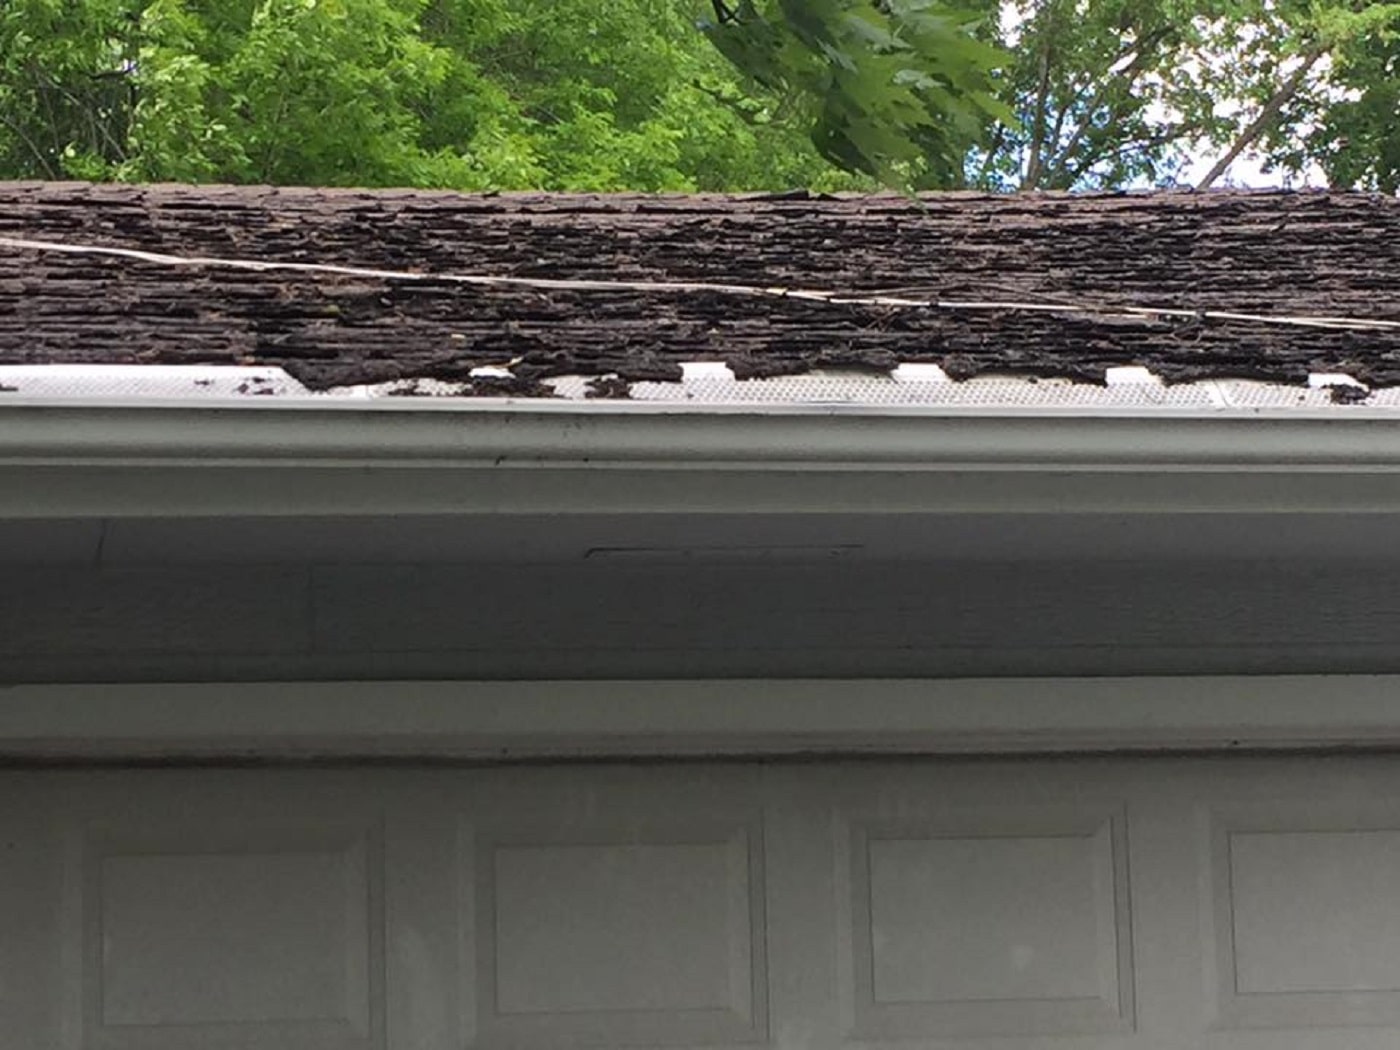  failing roof in Western Wisconsin 